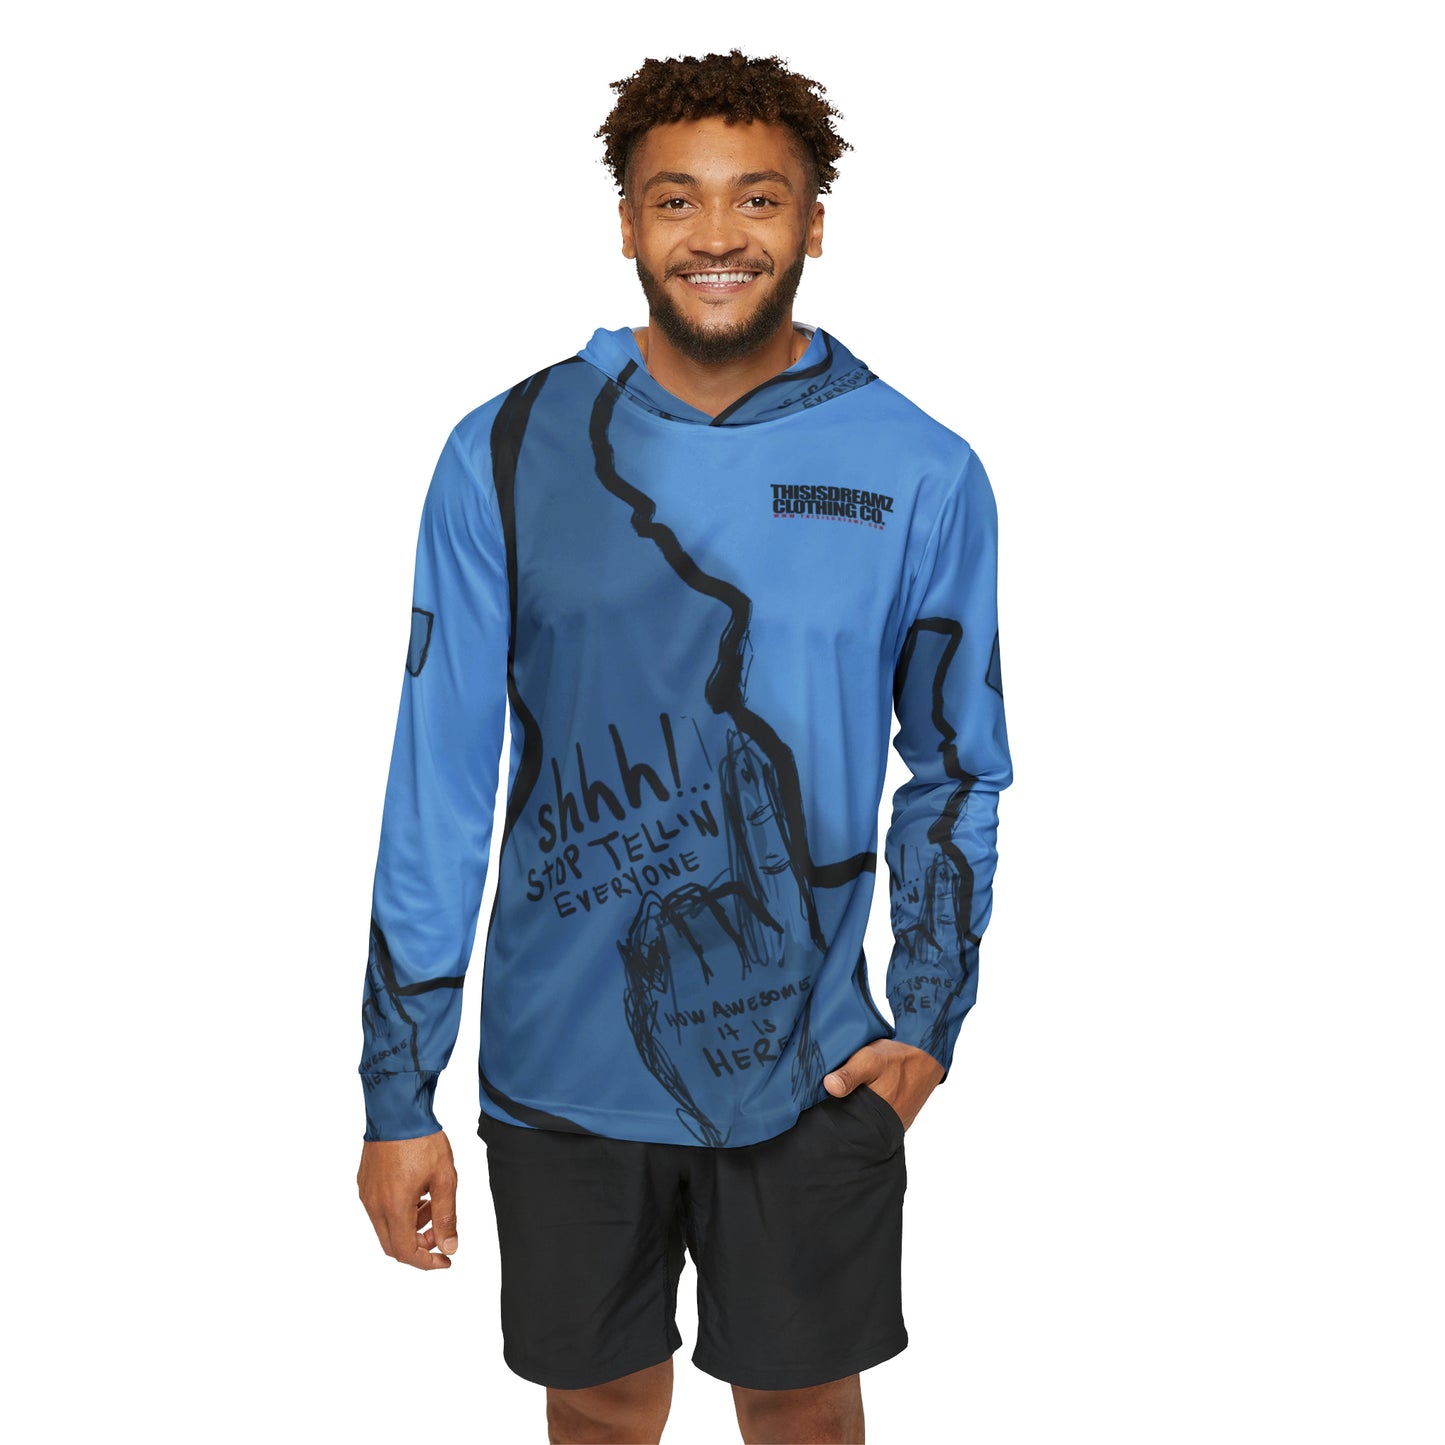 Shhh Sketch Idaho is Awesome Men's Sports Warmup Hoodie (blue)